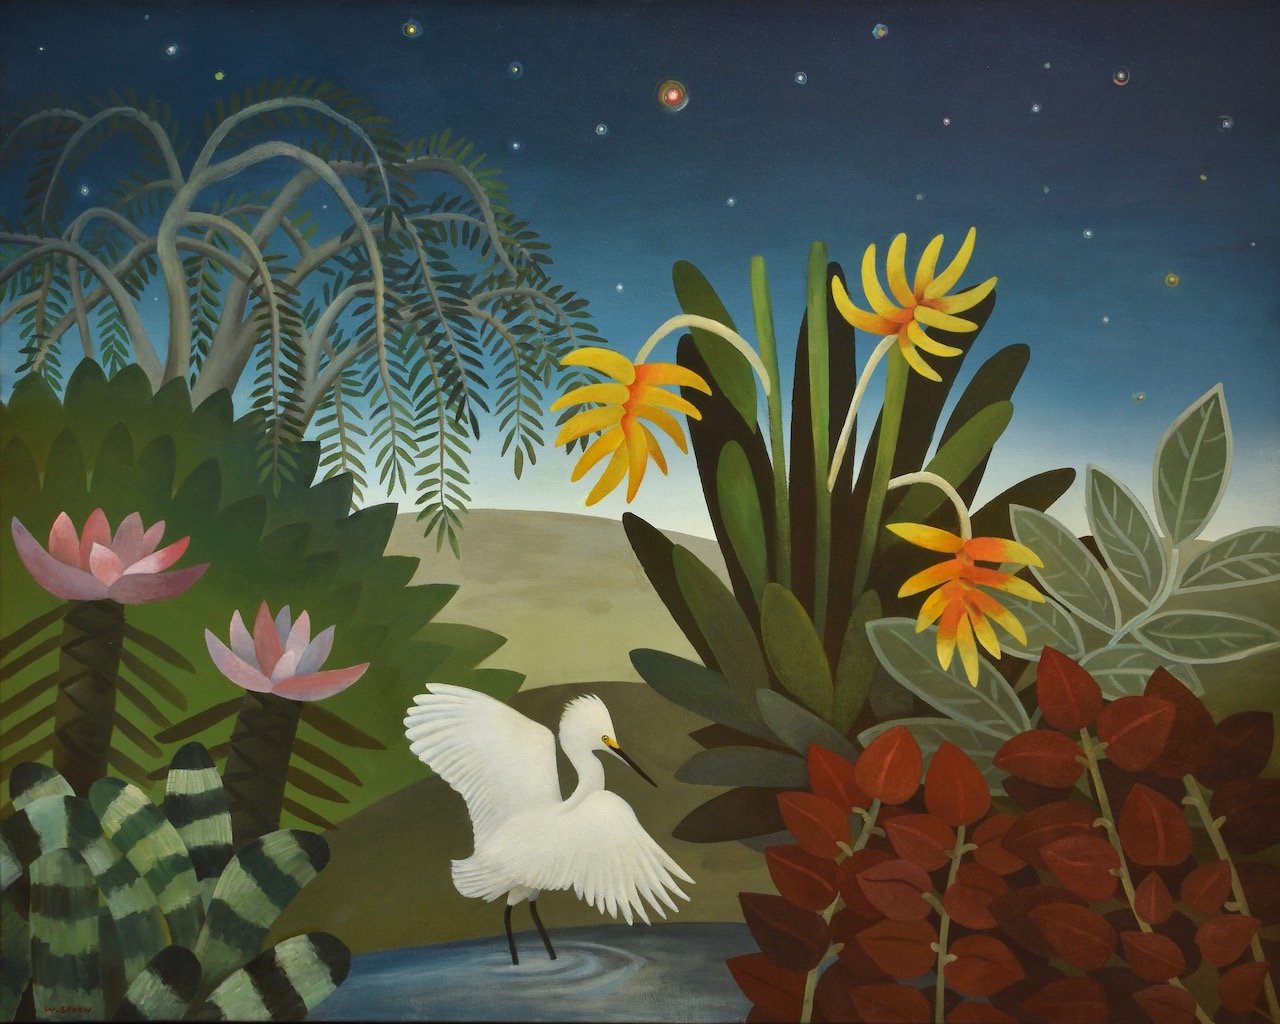 Wilfred Spoon, Egret And Mars, 60 x 48, oil on canvas, $12,500.jpeg